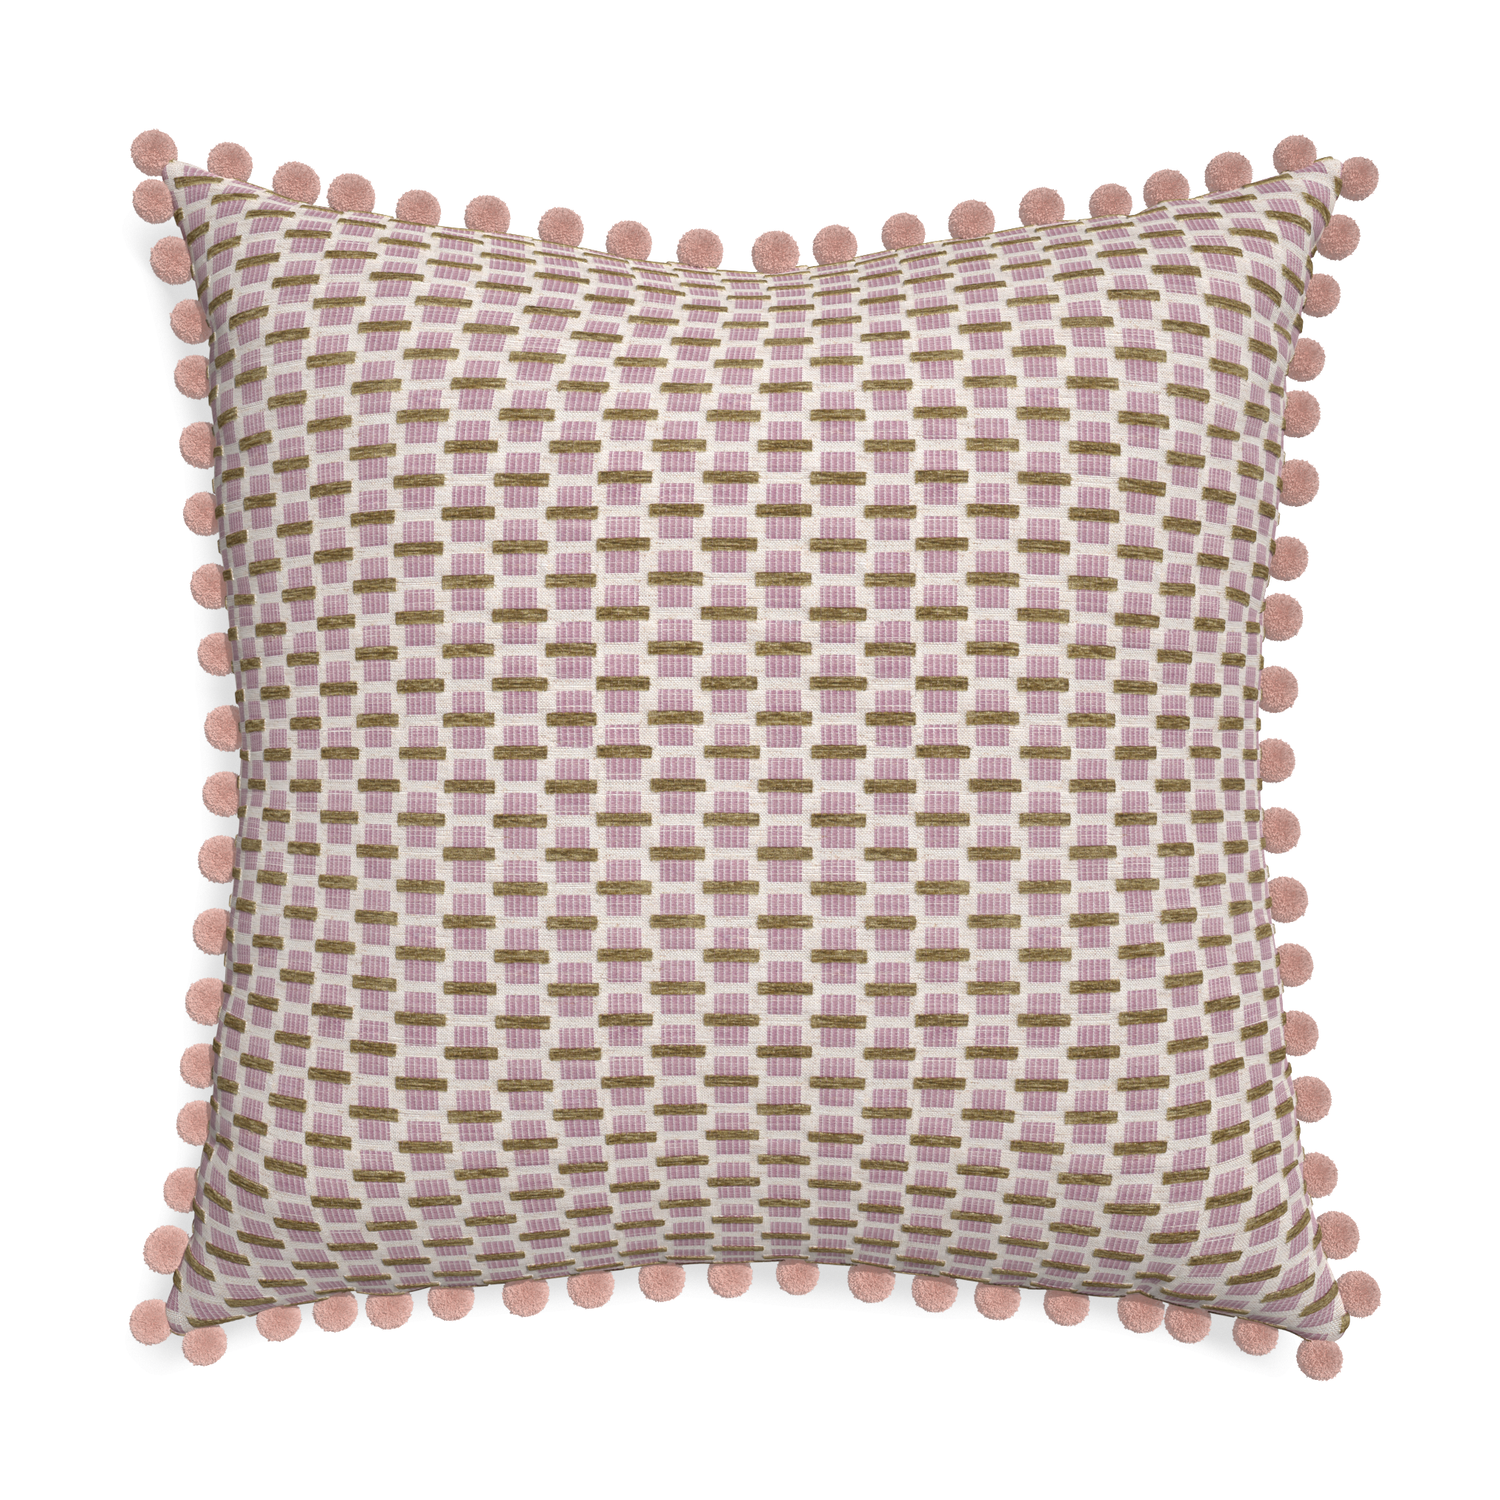 Euro-sham willow orchid custom pink geometric chenillepillow with rose pom pom on white background